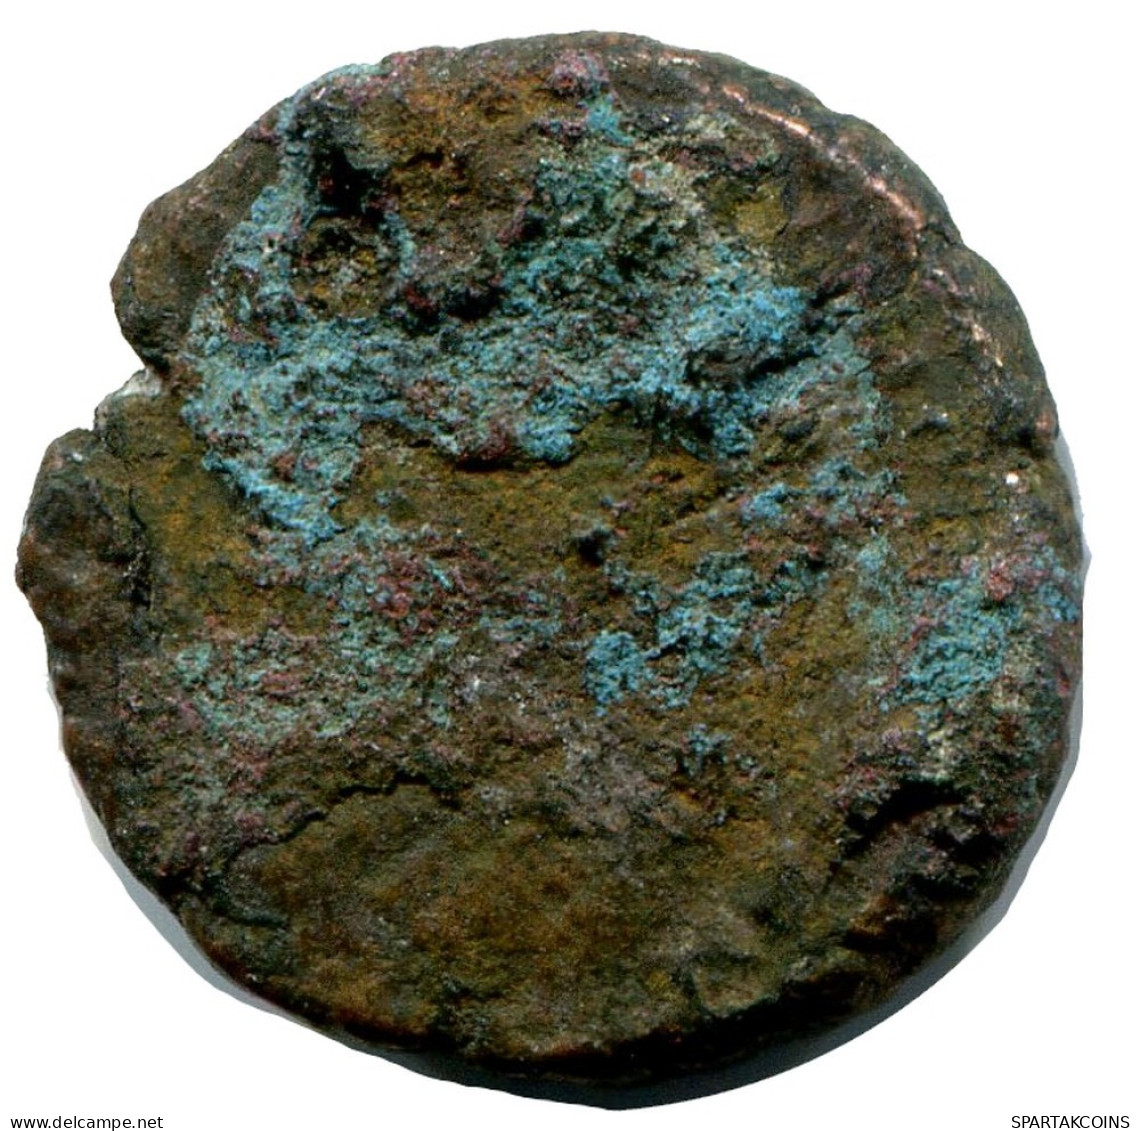 ROMAN Coin MINTED IN ALEKSANDRIA FOUND IN IHNASYAH HOARD EGYPT #ANC10152.14.D.A - The Christian Empire (307 AD Tot 363 AD)